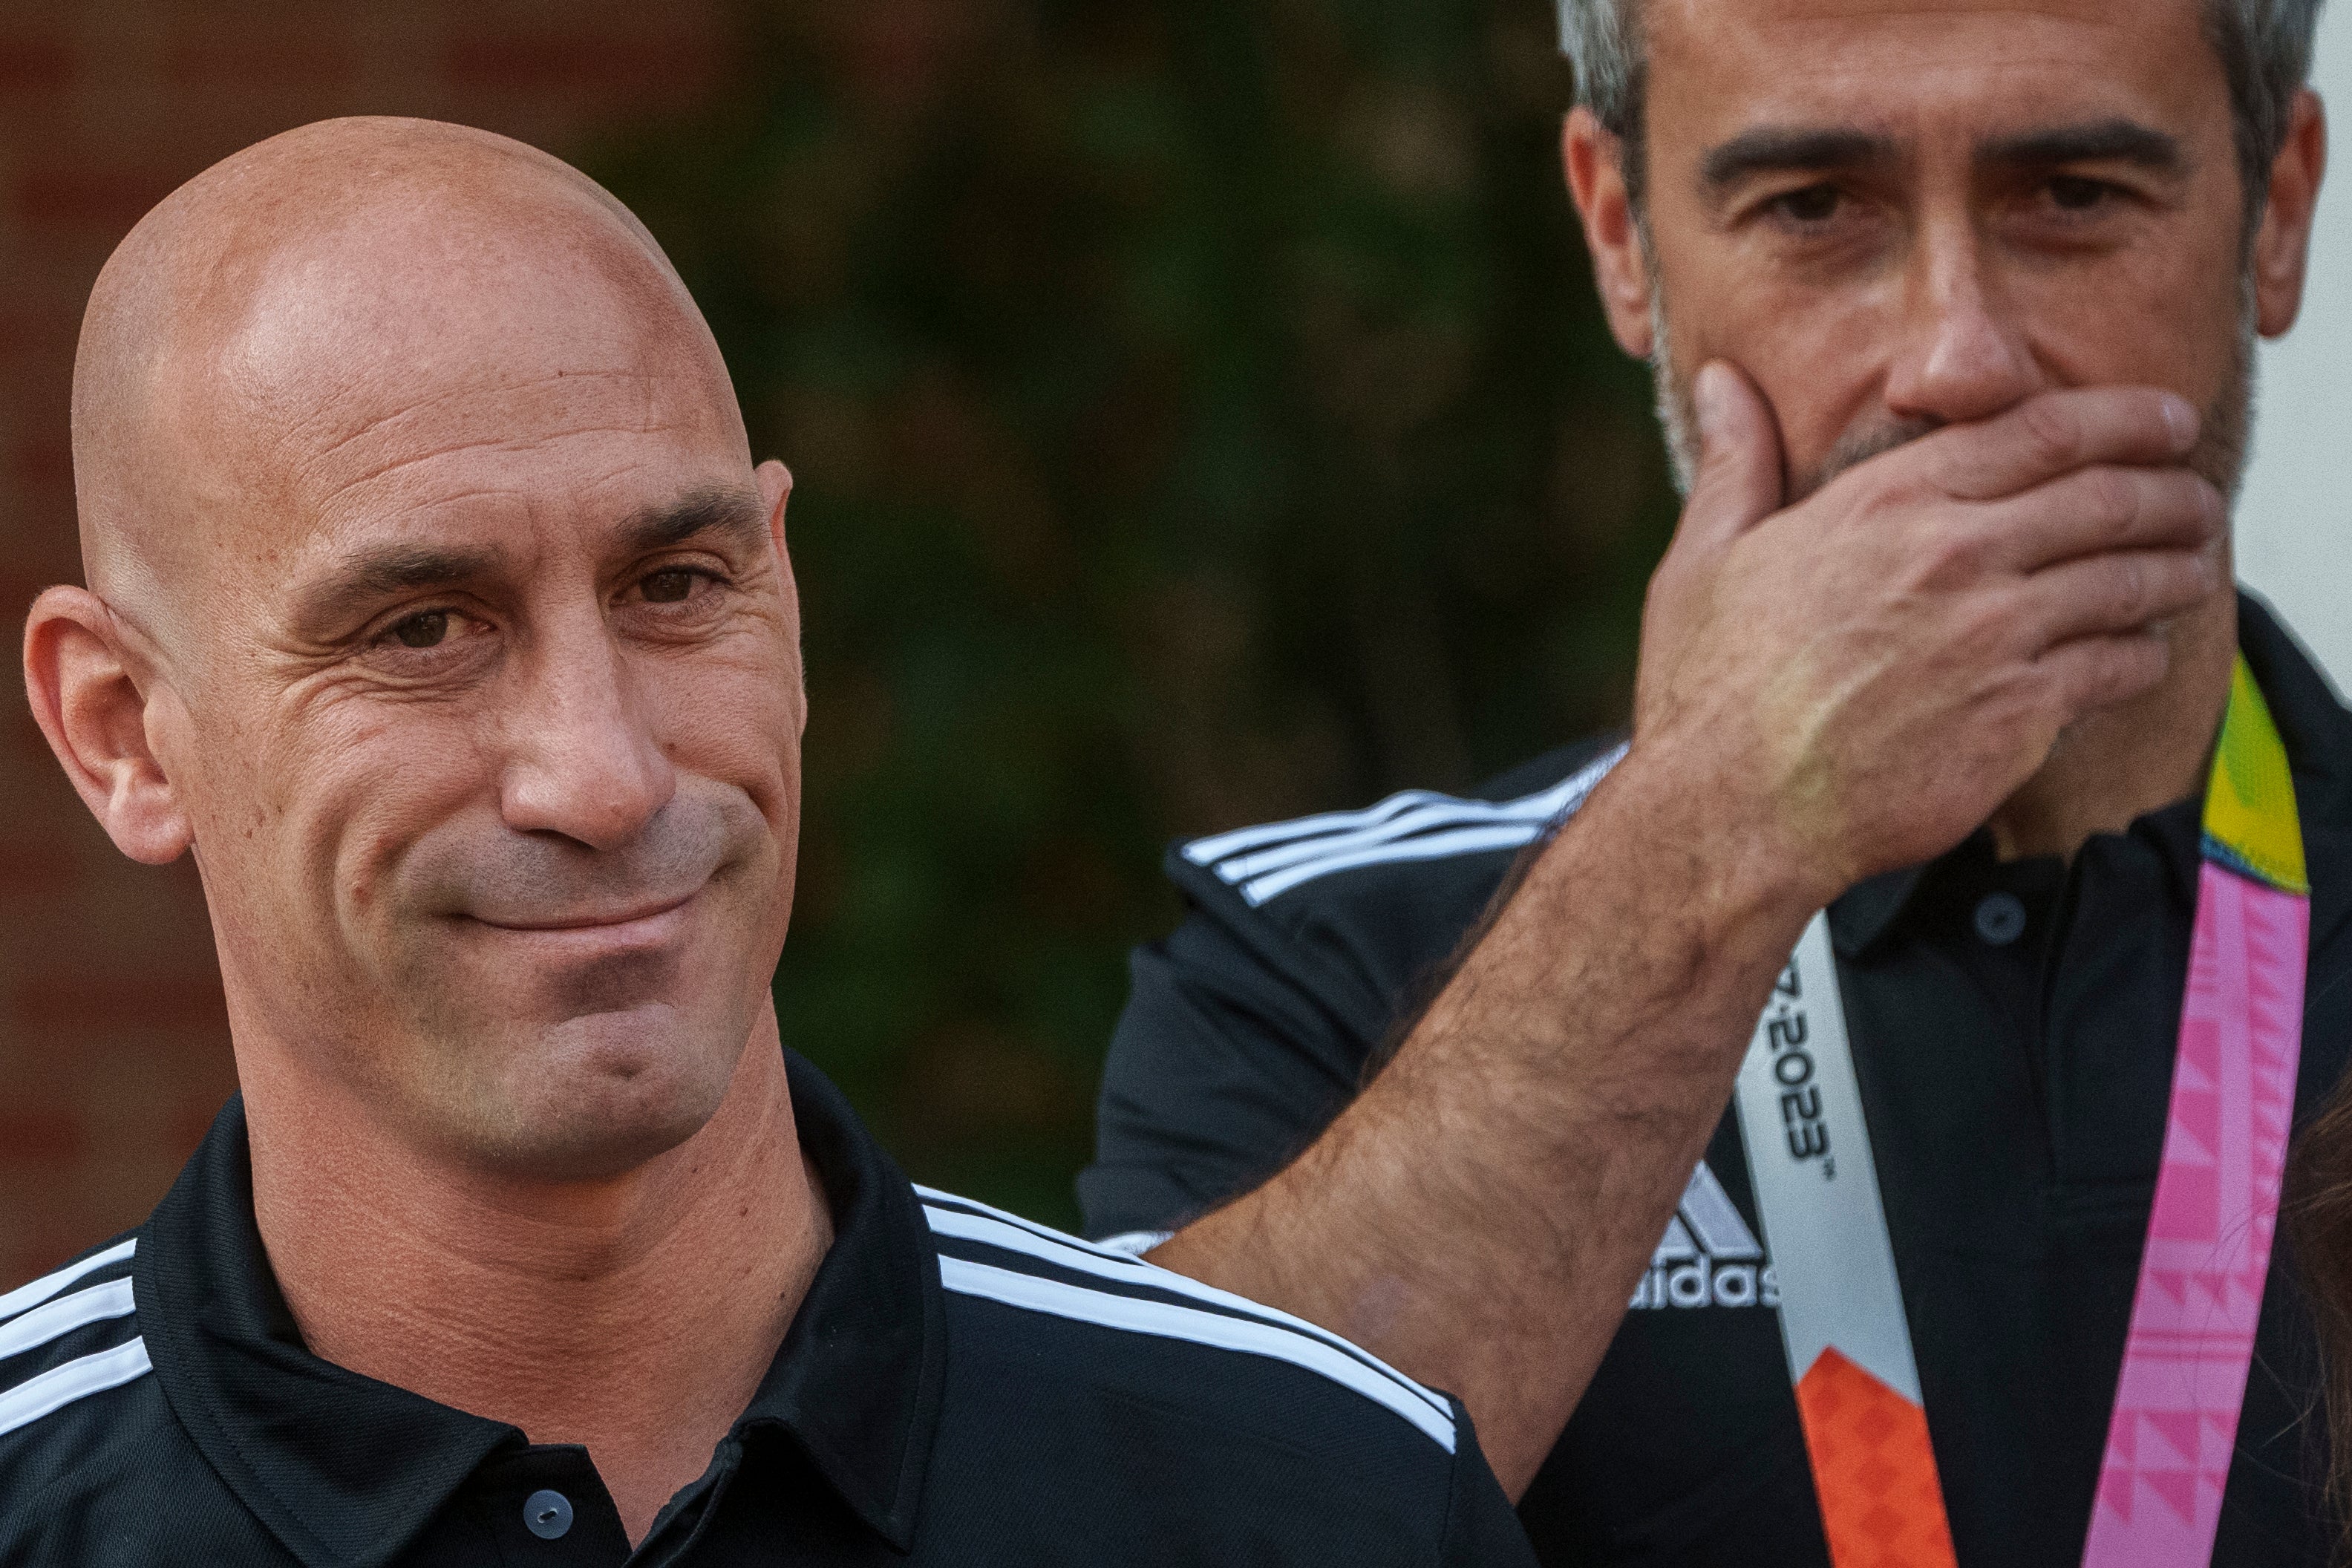 Rubiales was suspended from his role as Spanish FA President by Fifa